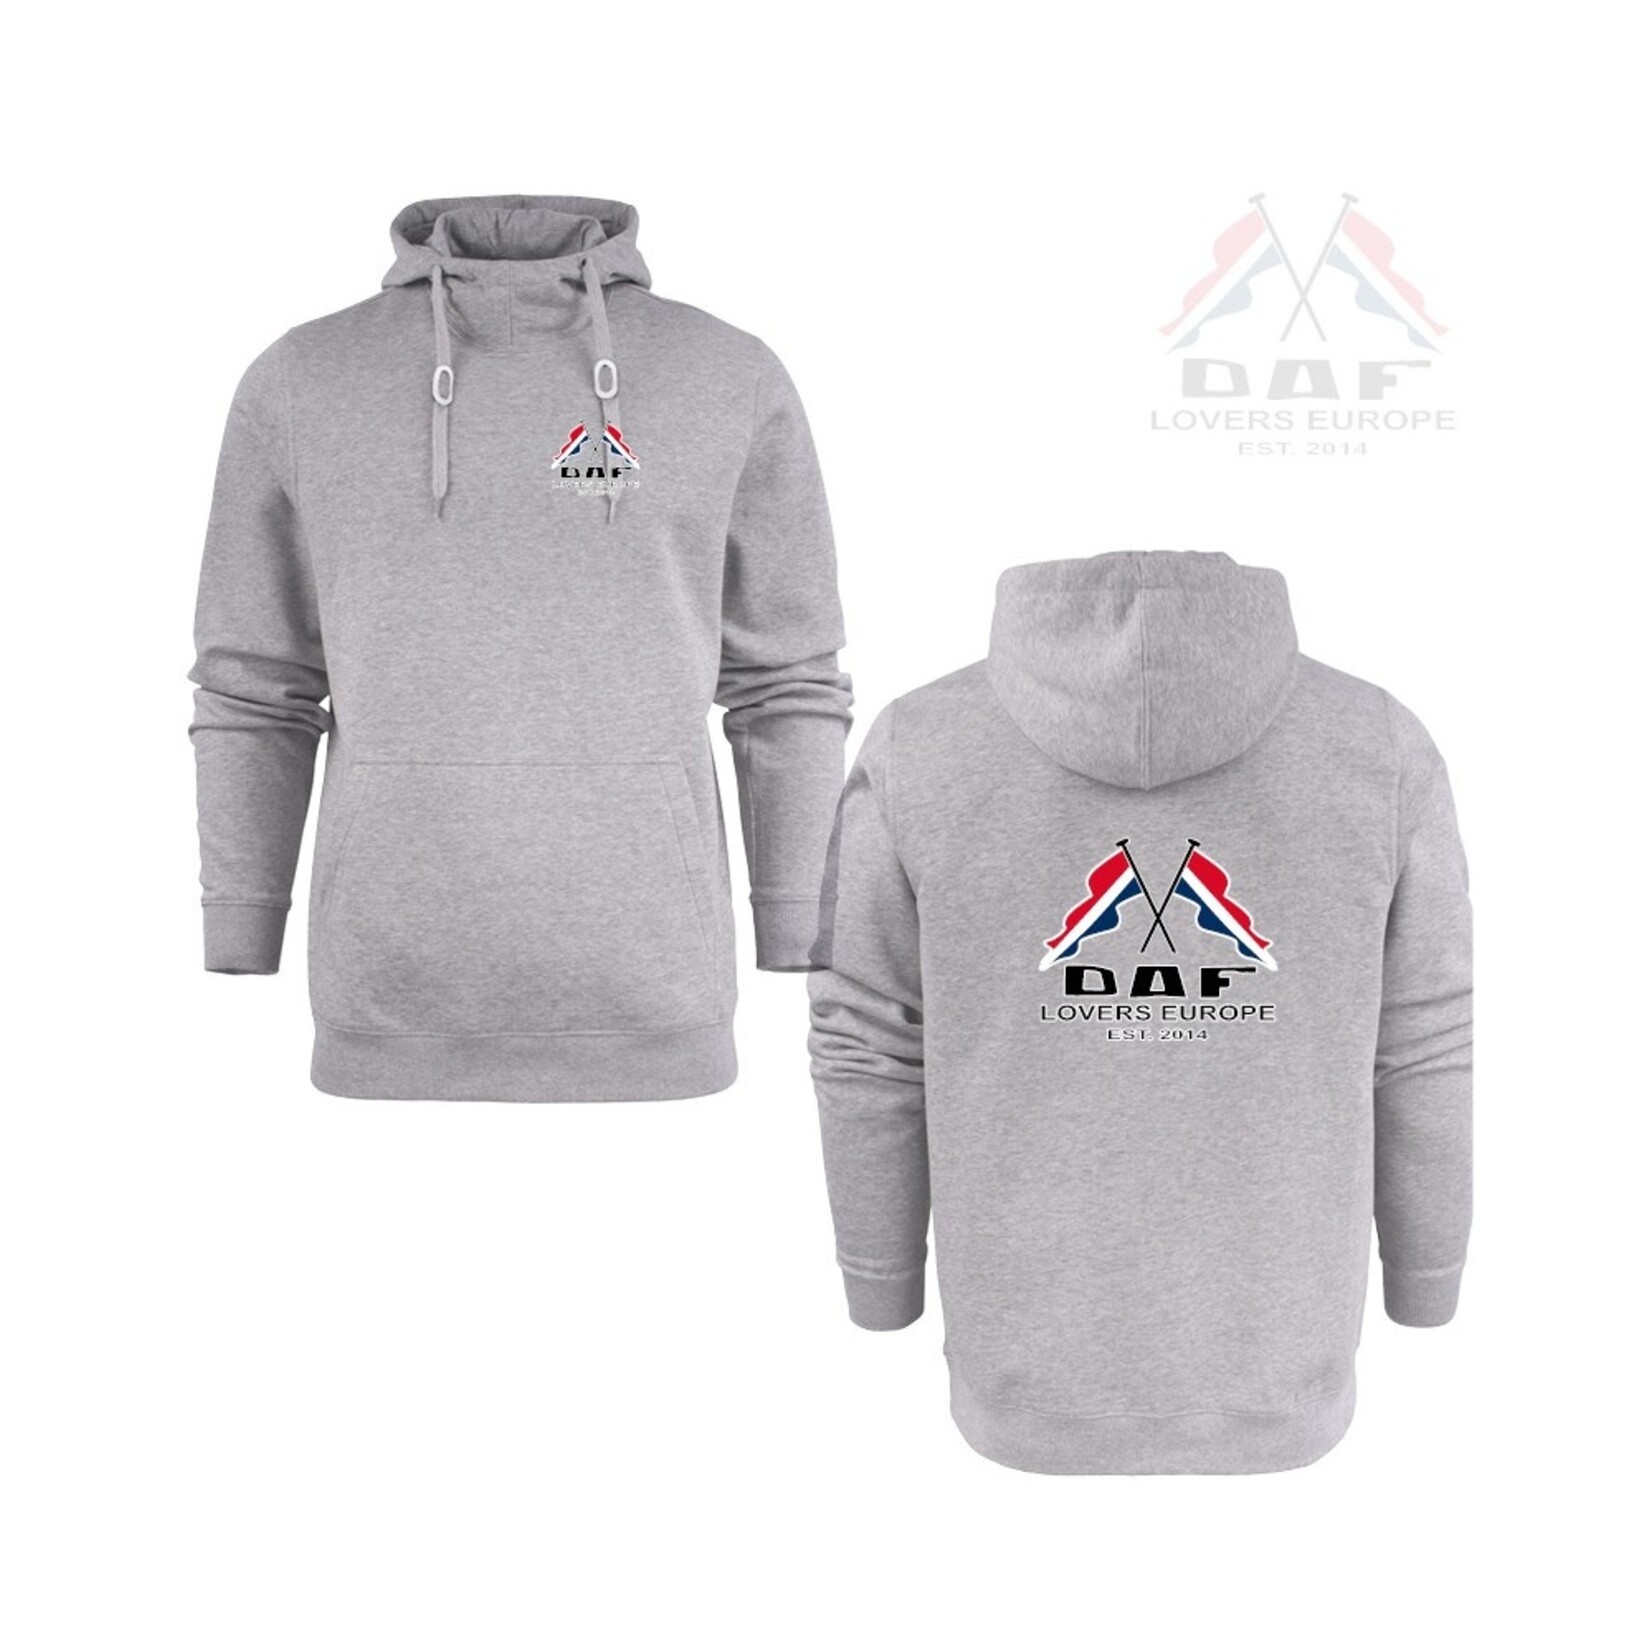 ONLY WAY IS DUTCH DAF Lovers Europe Hooded Sweater